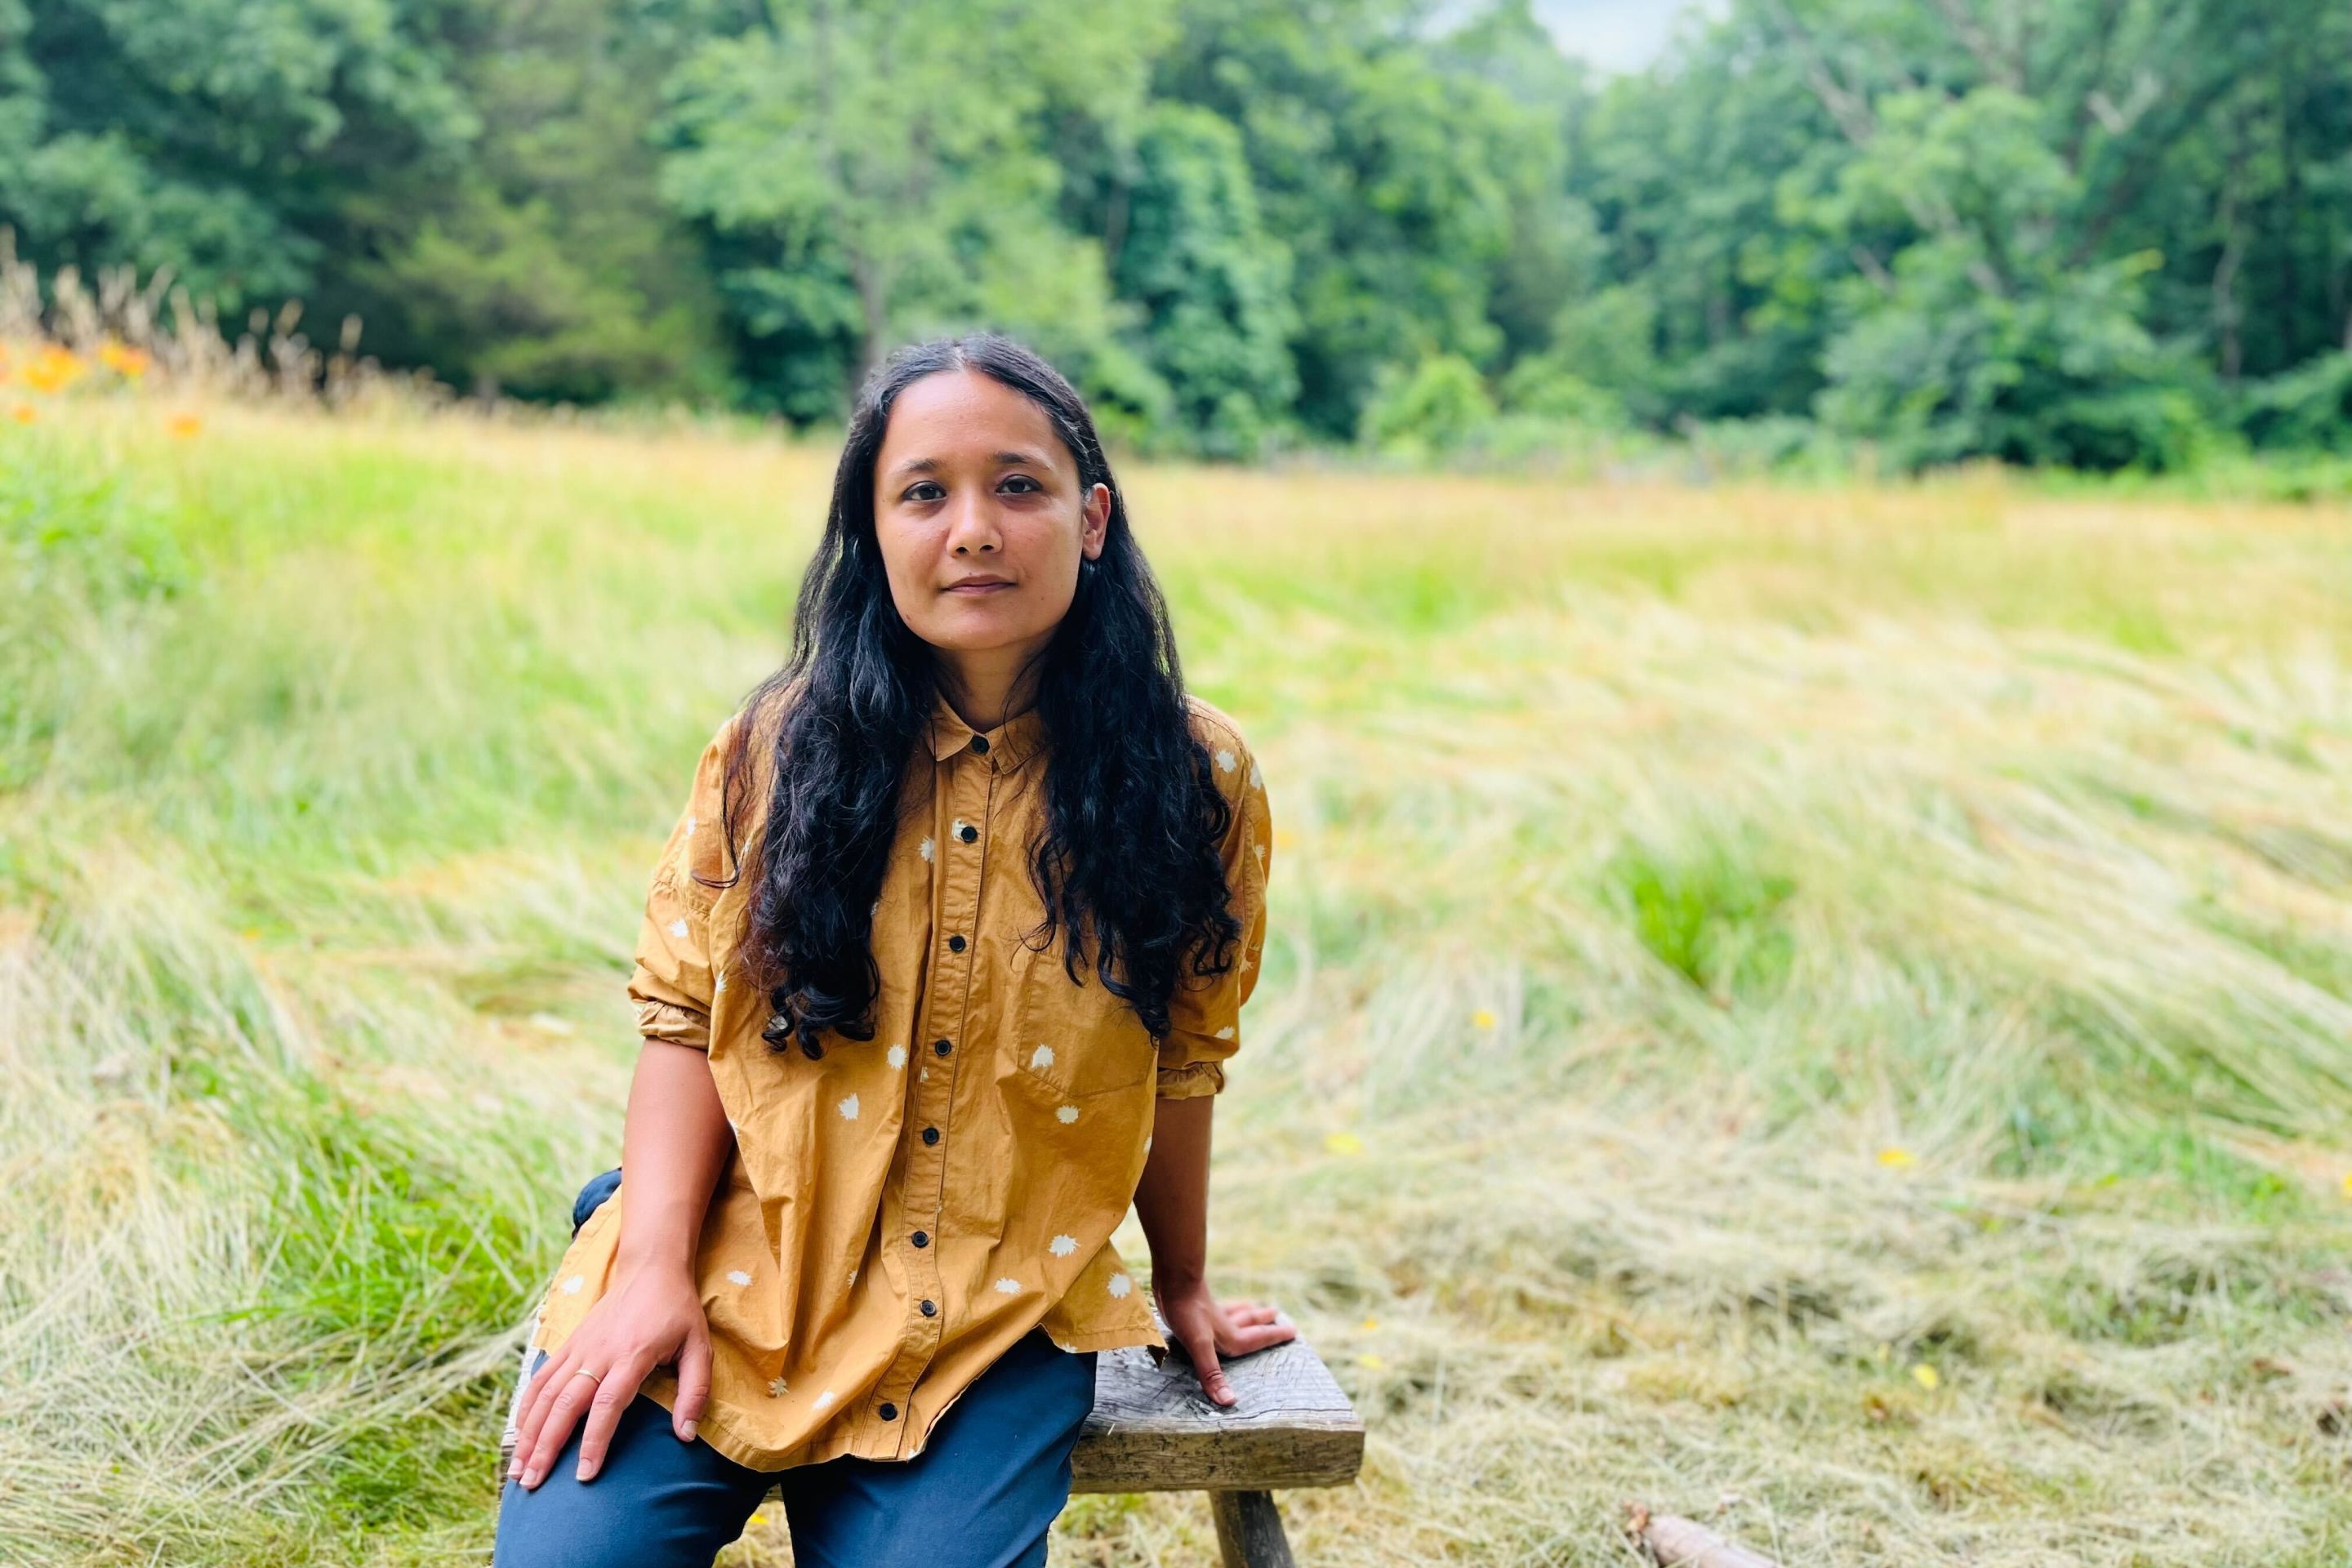 Sarahana Shrestha, the Democratic nominee for NY state Assembly District 103 in the Hudson River Valley, sits on a stool in a grassy field.